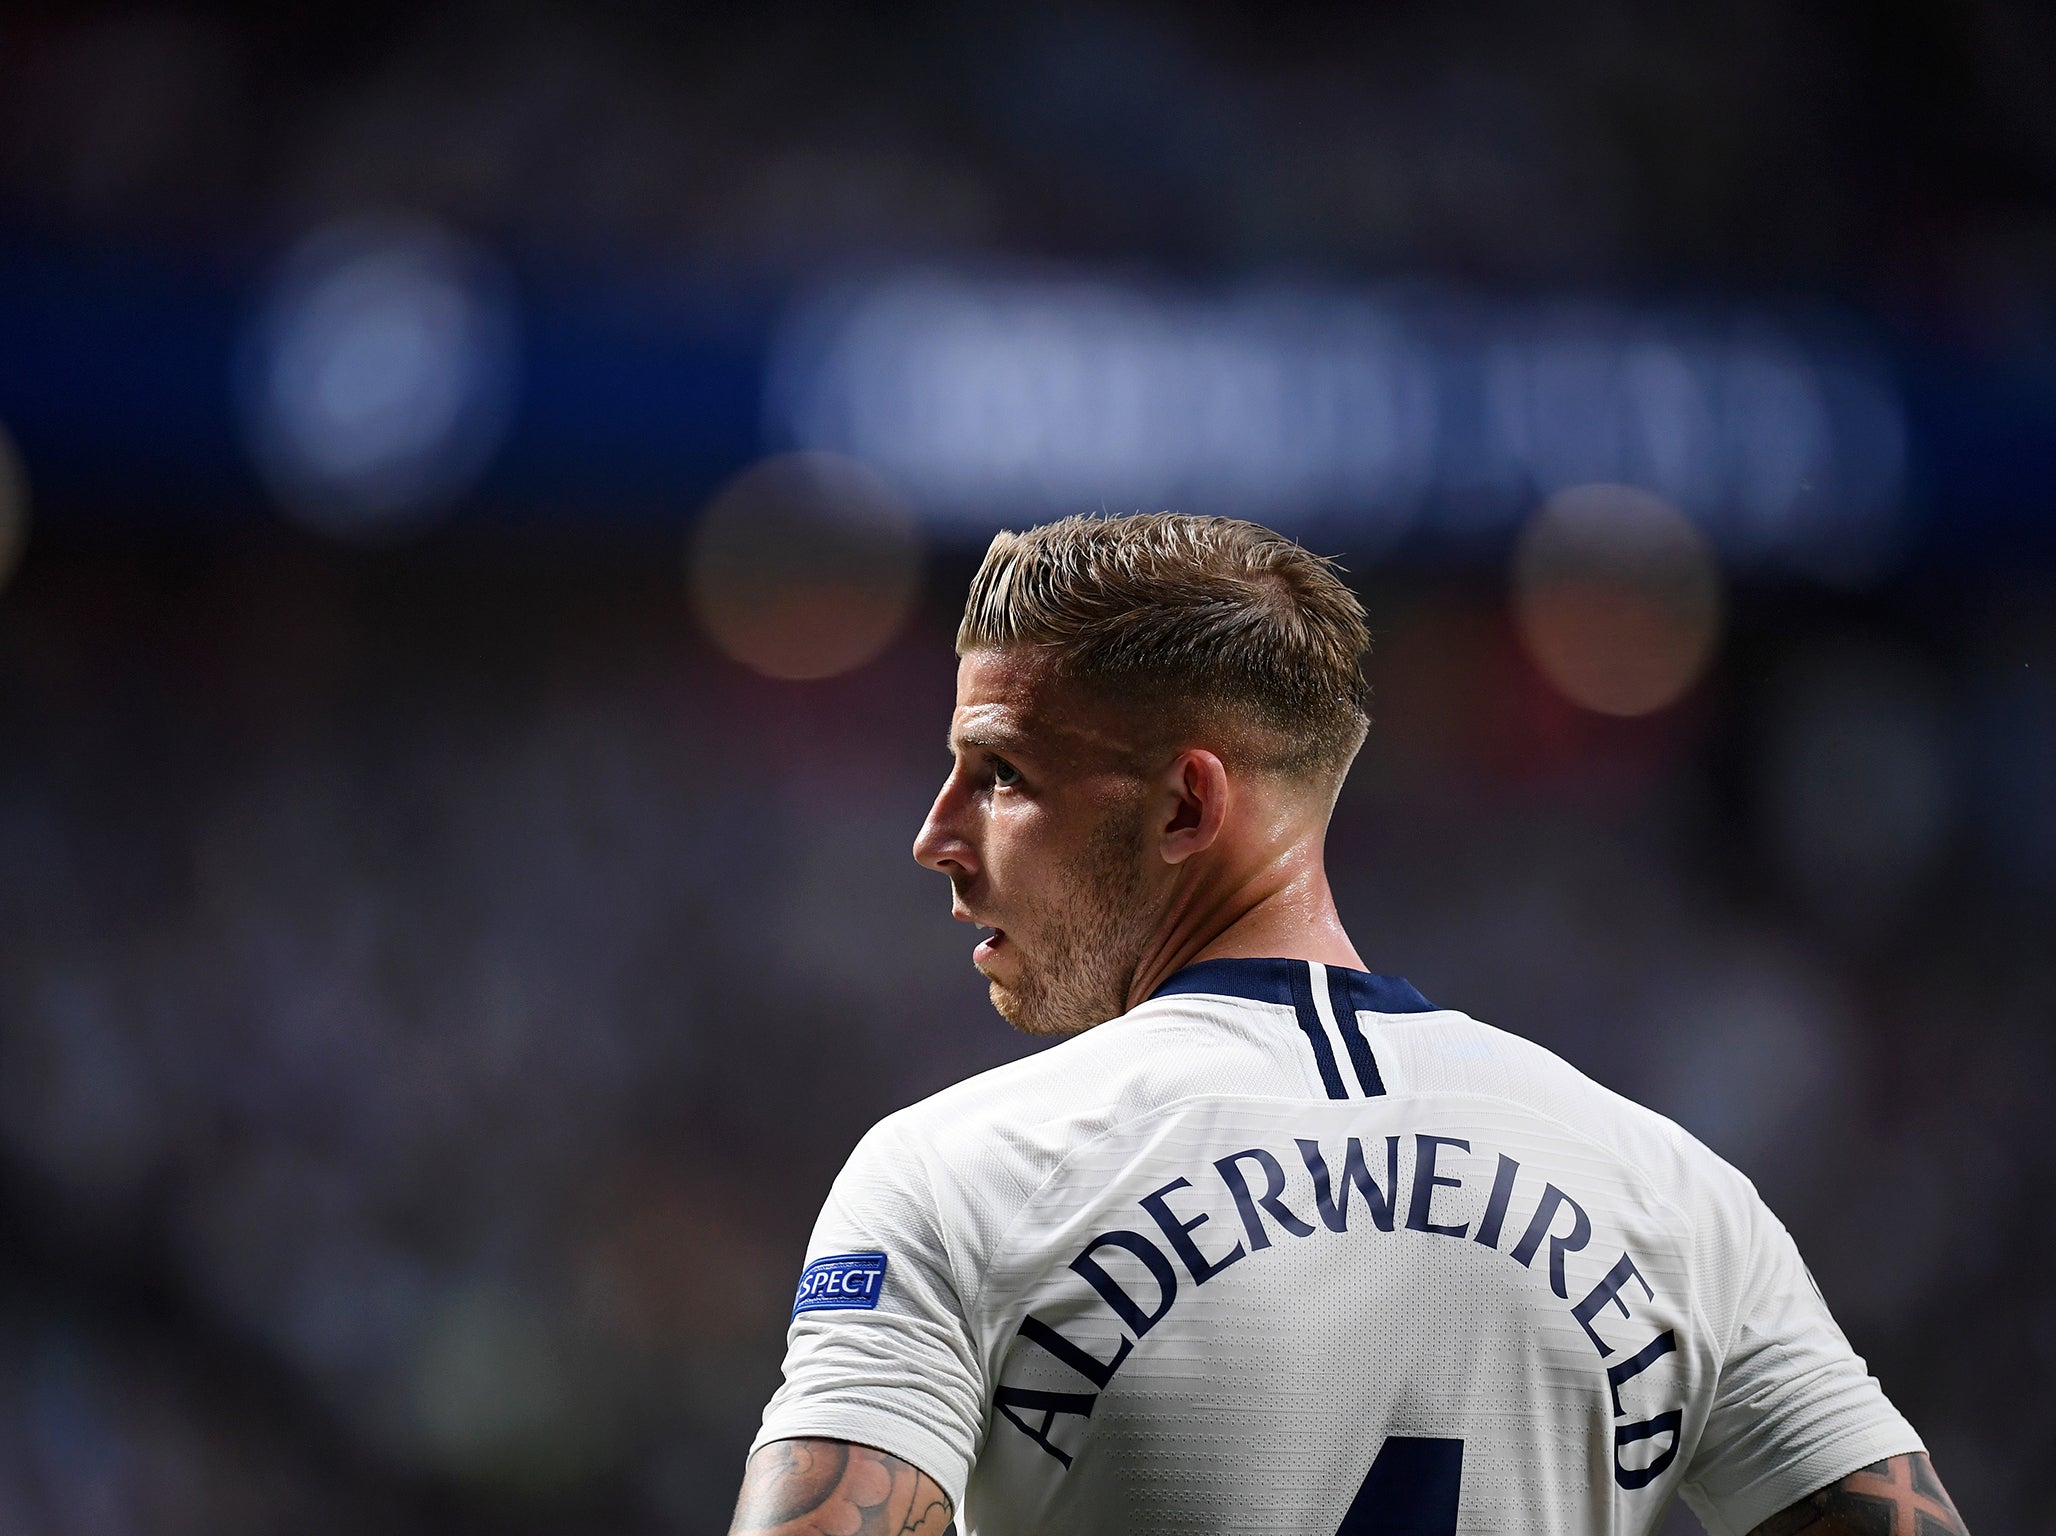 Toby Alderweireld could be sold to raise funds